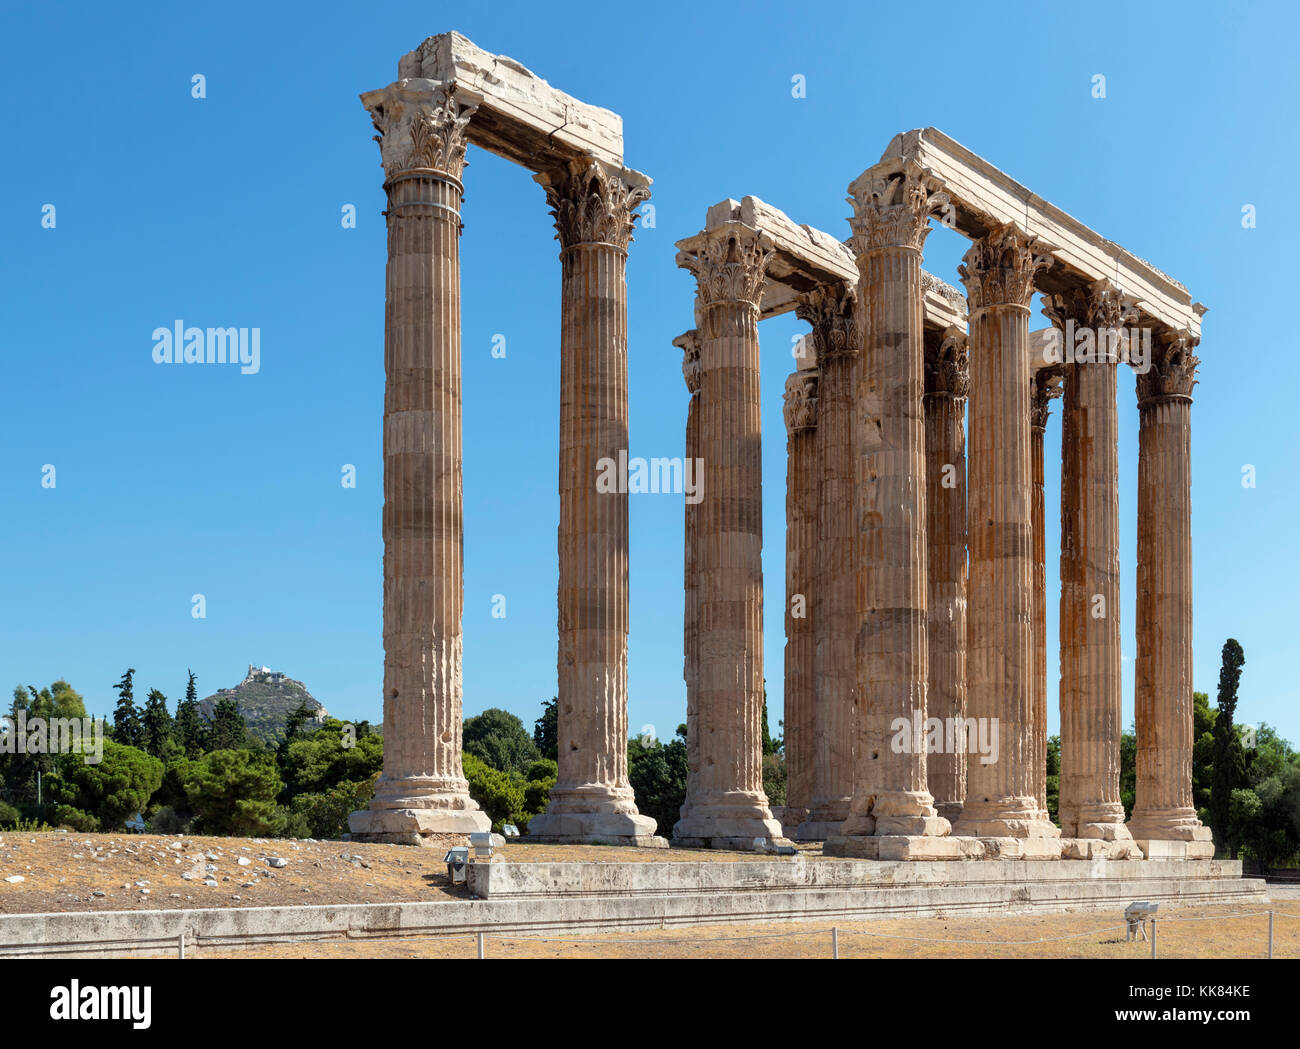 The Temple of Olympian Zeus (Olympeion) with Mount Lycabettus (Lykavittos Hill) in the background, Athens, Greece Stock Photo